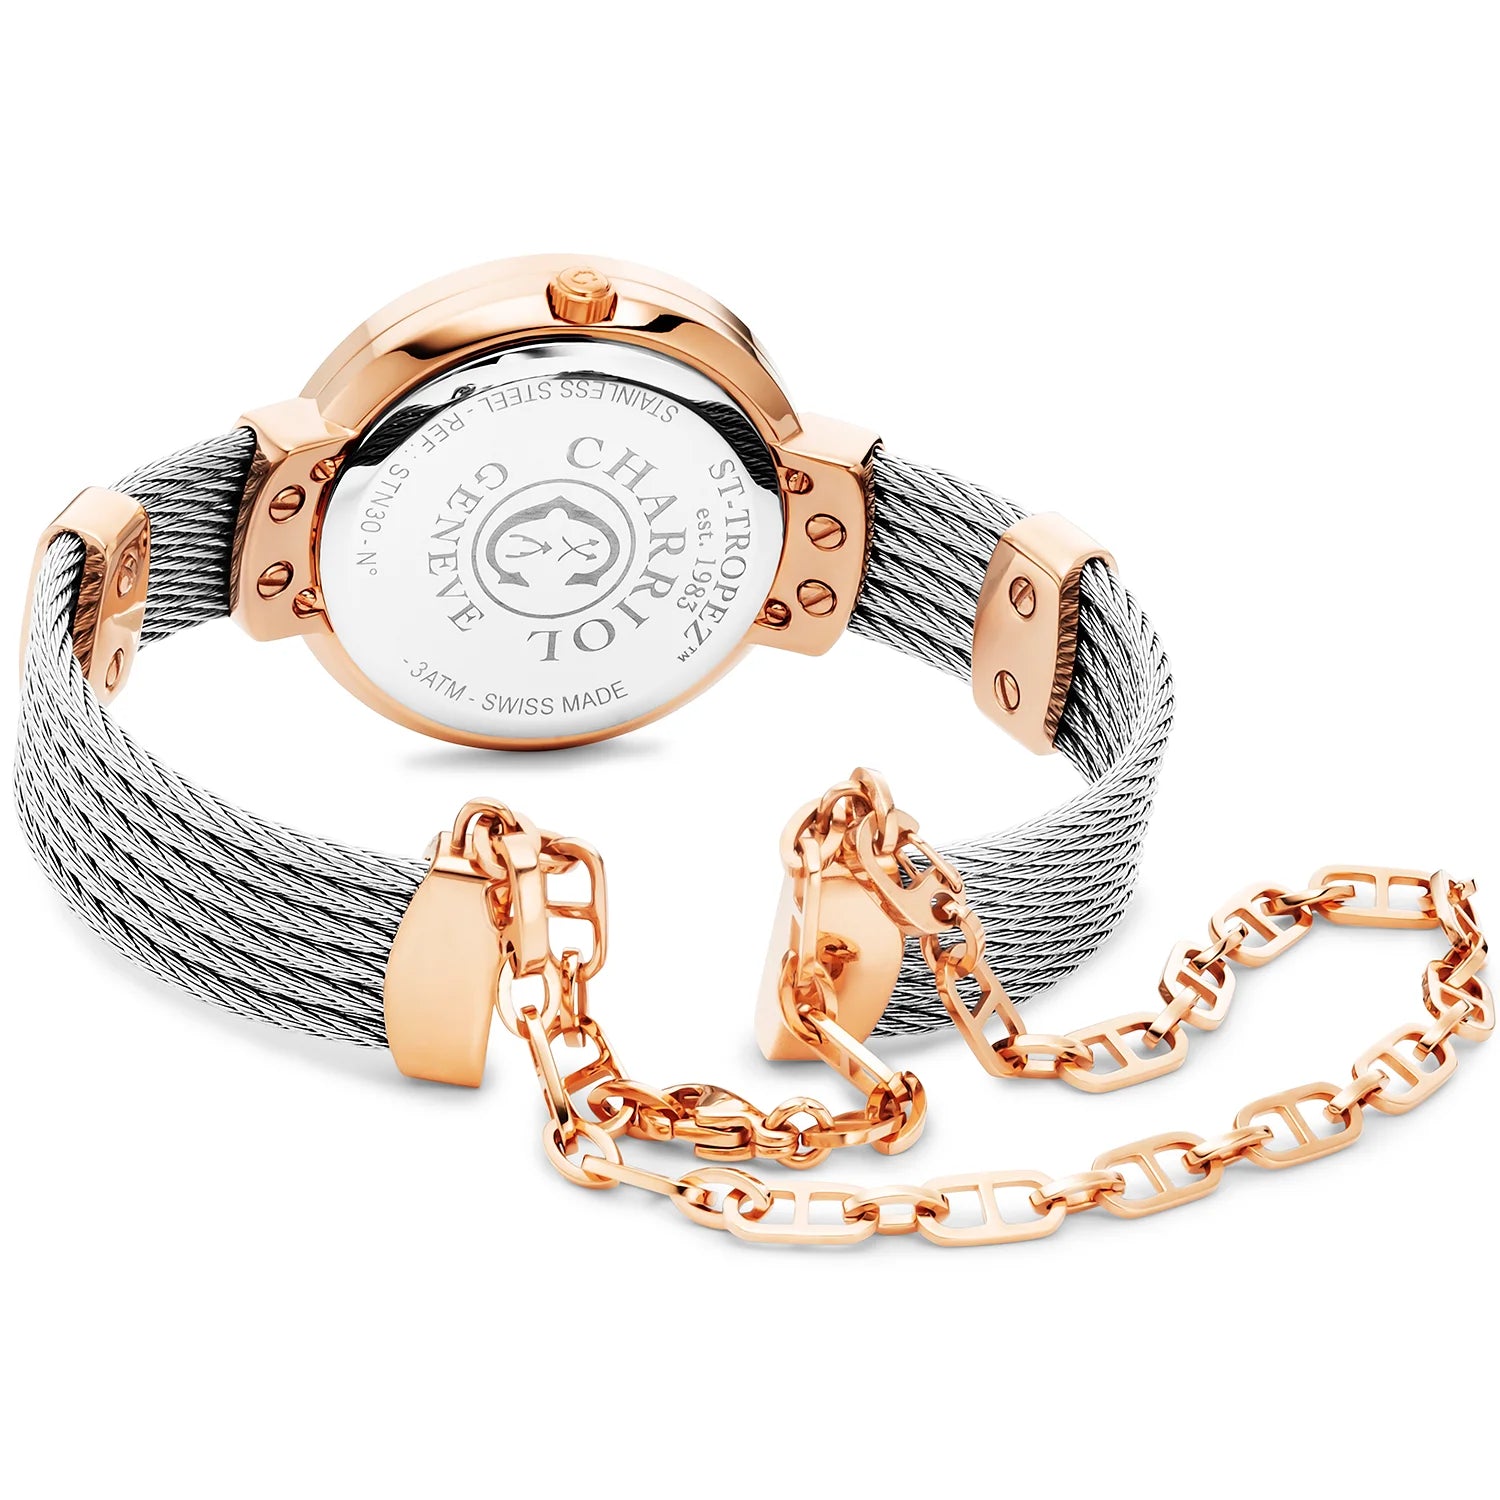 ST TROPEZ, 30MM, QUARTZ CALIBRE, WHITE MOTHER-OF-PEARL DIAL, ROSE GOLD PVD WITH 32 DIAMONDS BEZEL, STEEL CABLE BRACELET - Charriol Geneve -  Watch